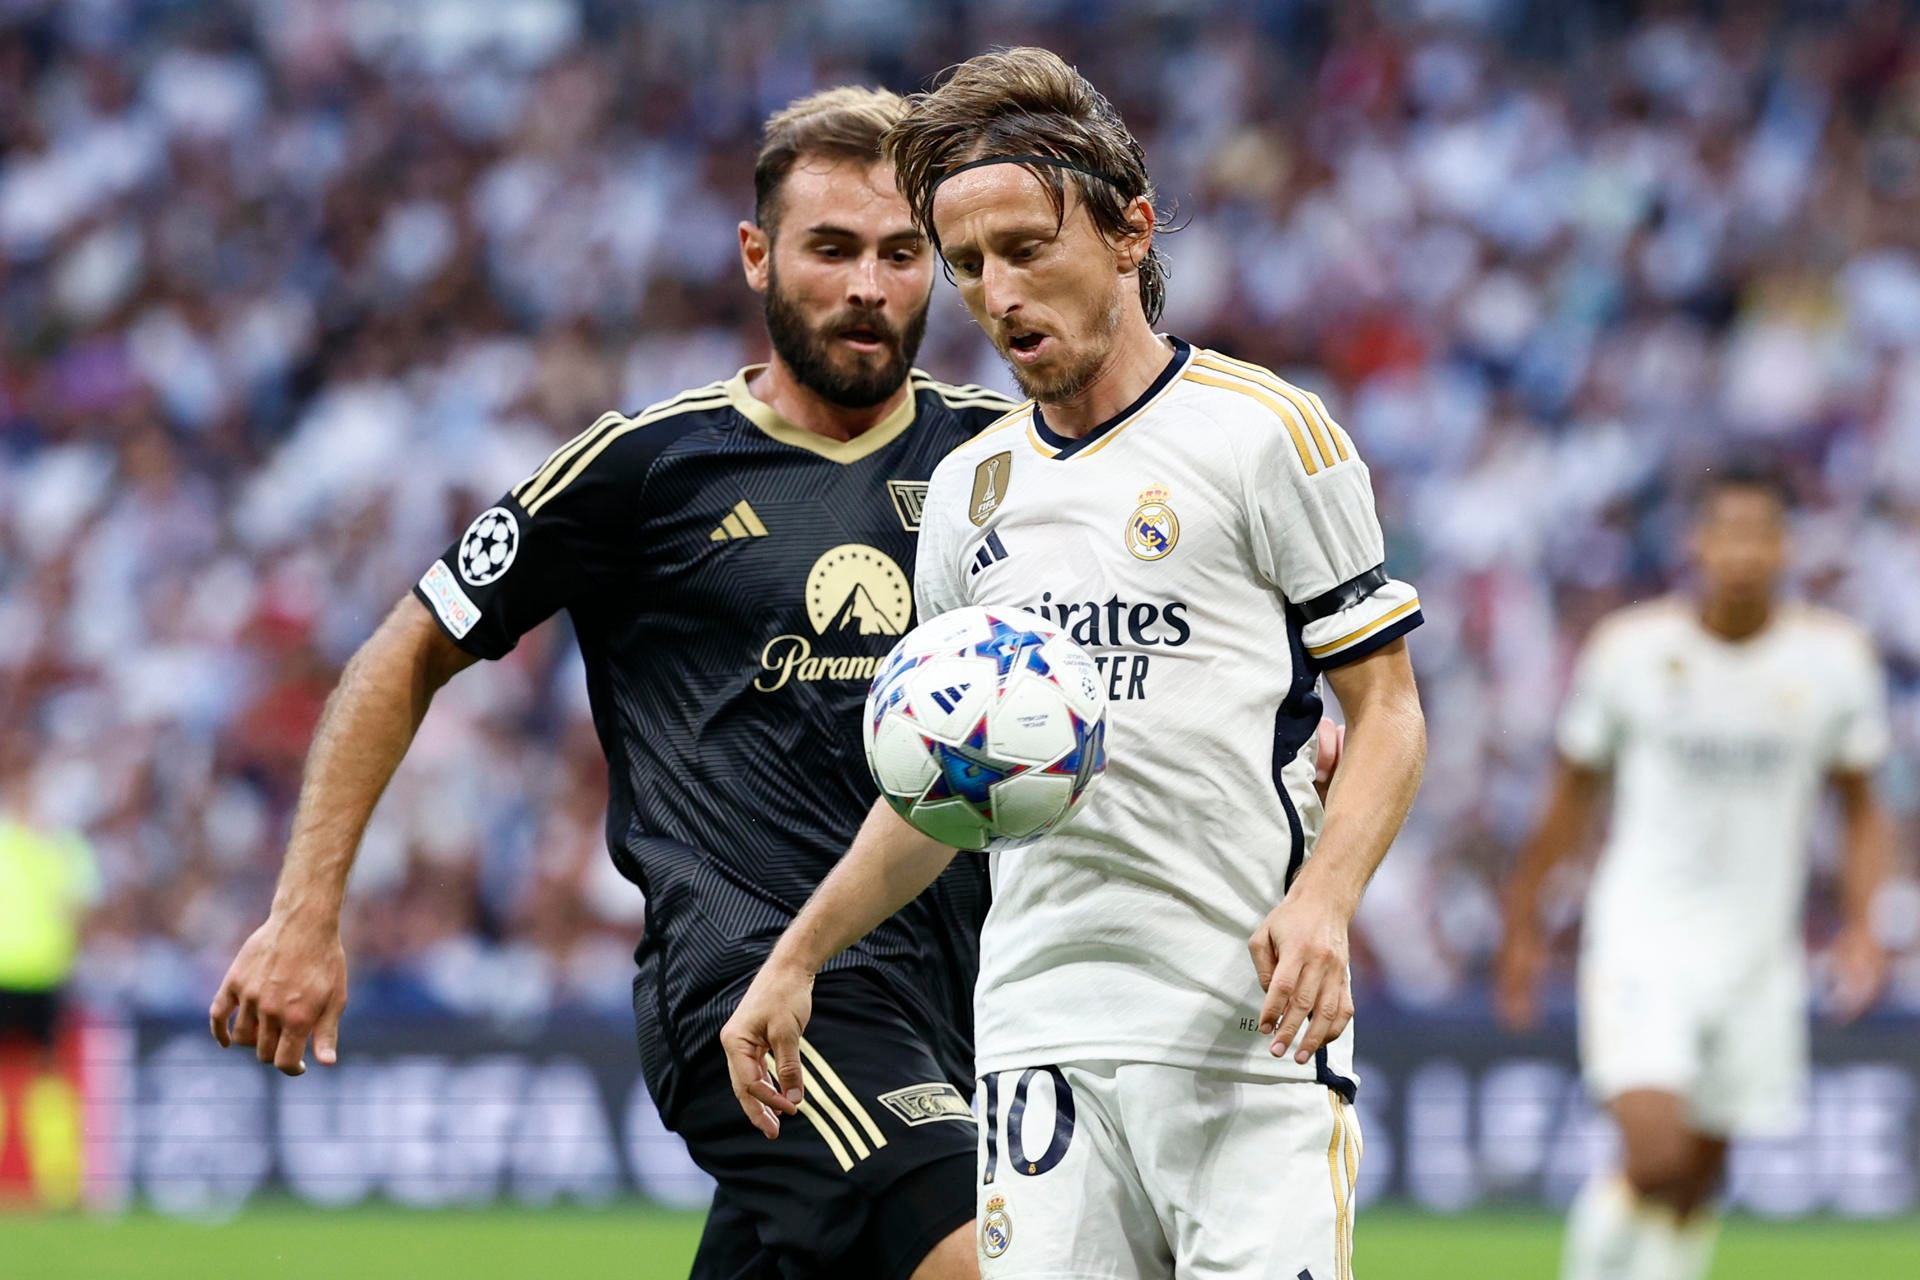 Completely fantasizing about what Real Madrid players should join MLS